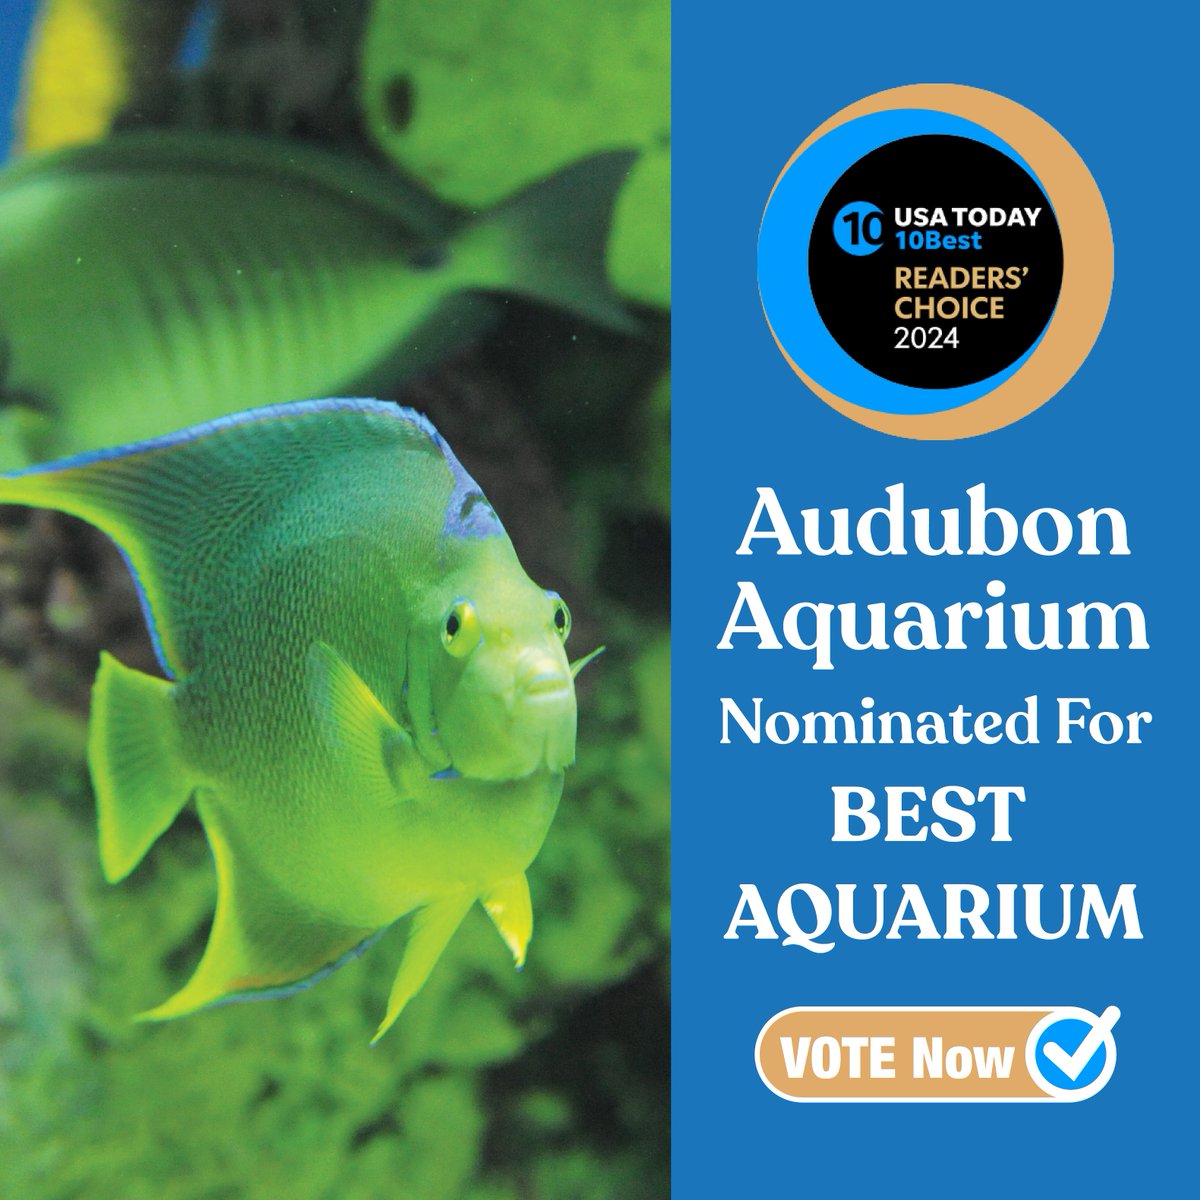 Help us claim a top spot in @10Best Readers' Choice Awards! Audubon Aquarium has once again been nominated in the Best Aquarium category and we need your help. Vote once daily through May 13th. VOTE HERE (takes one click): bit.ly/4d7biMw